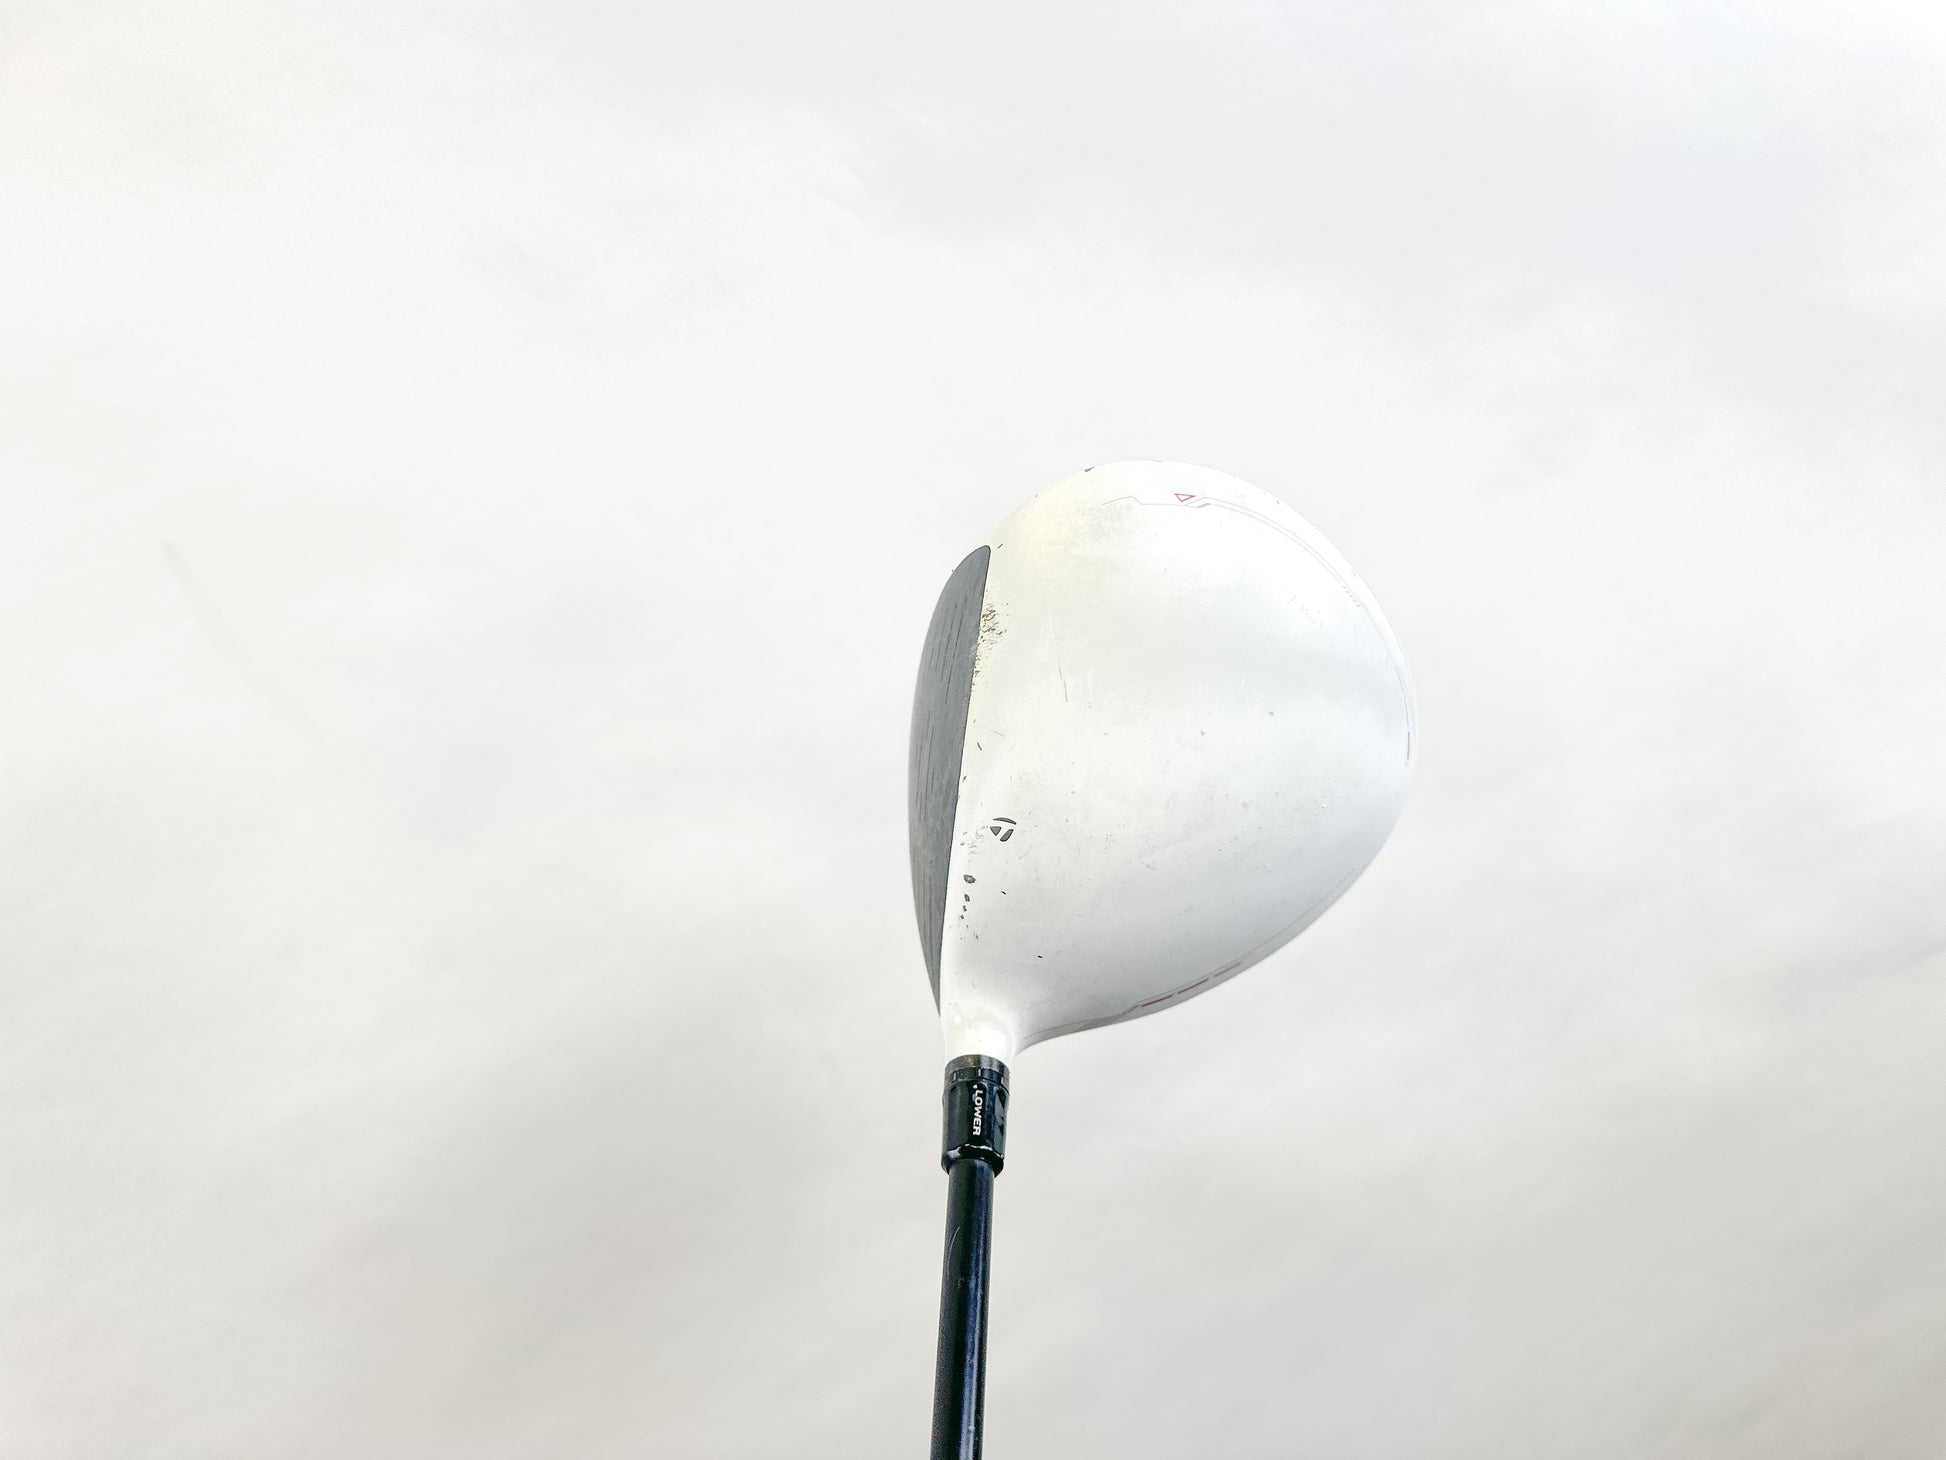 Used TaylorMade R11 Driver - Right-Handed - 10.5 Degrees - Regular Flex-Next Round